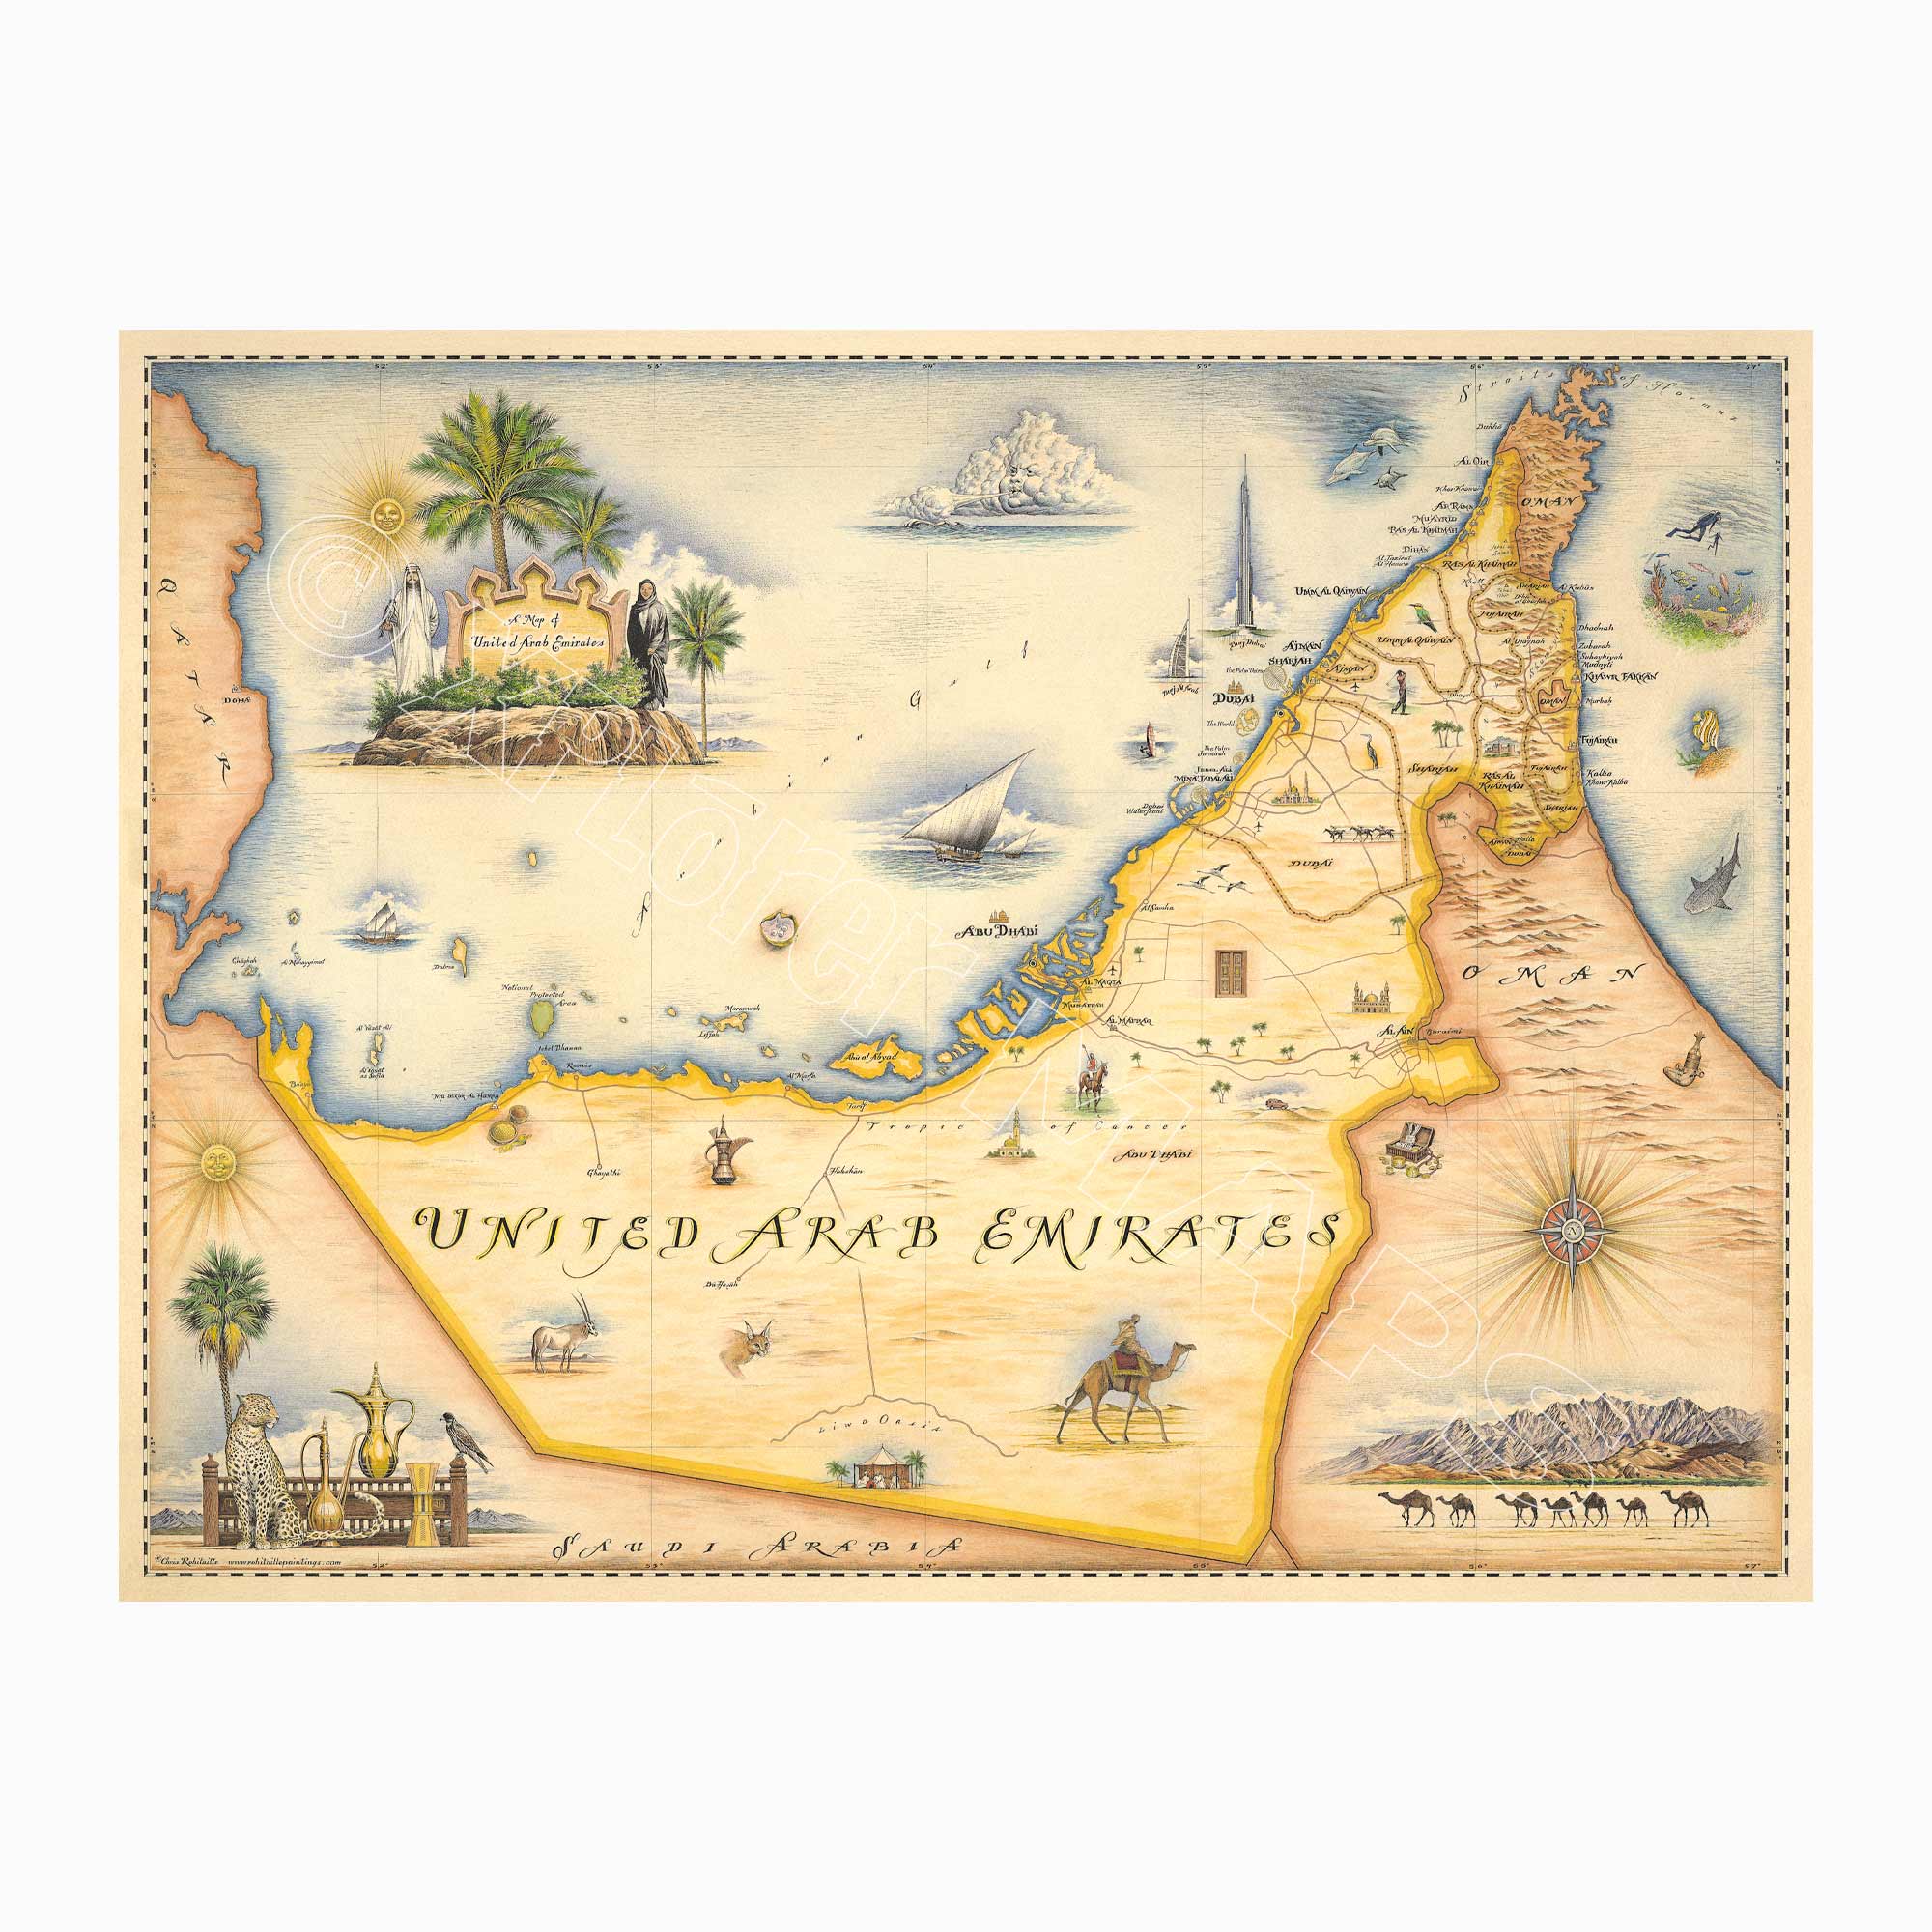 The United Arab Emirates hand-drawn map in earth tones beige and yellow. The map includes illustrations of Abu Dhabi, Dubai, and Oman. Measures 24x18.